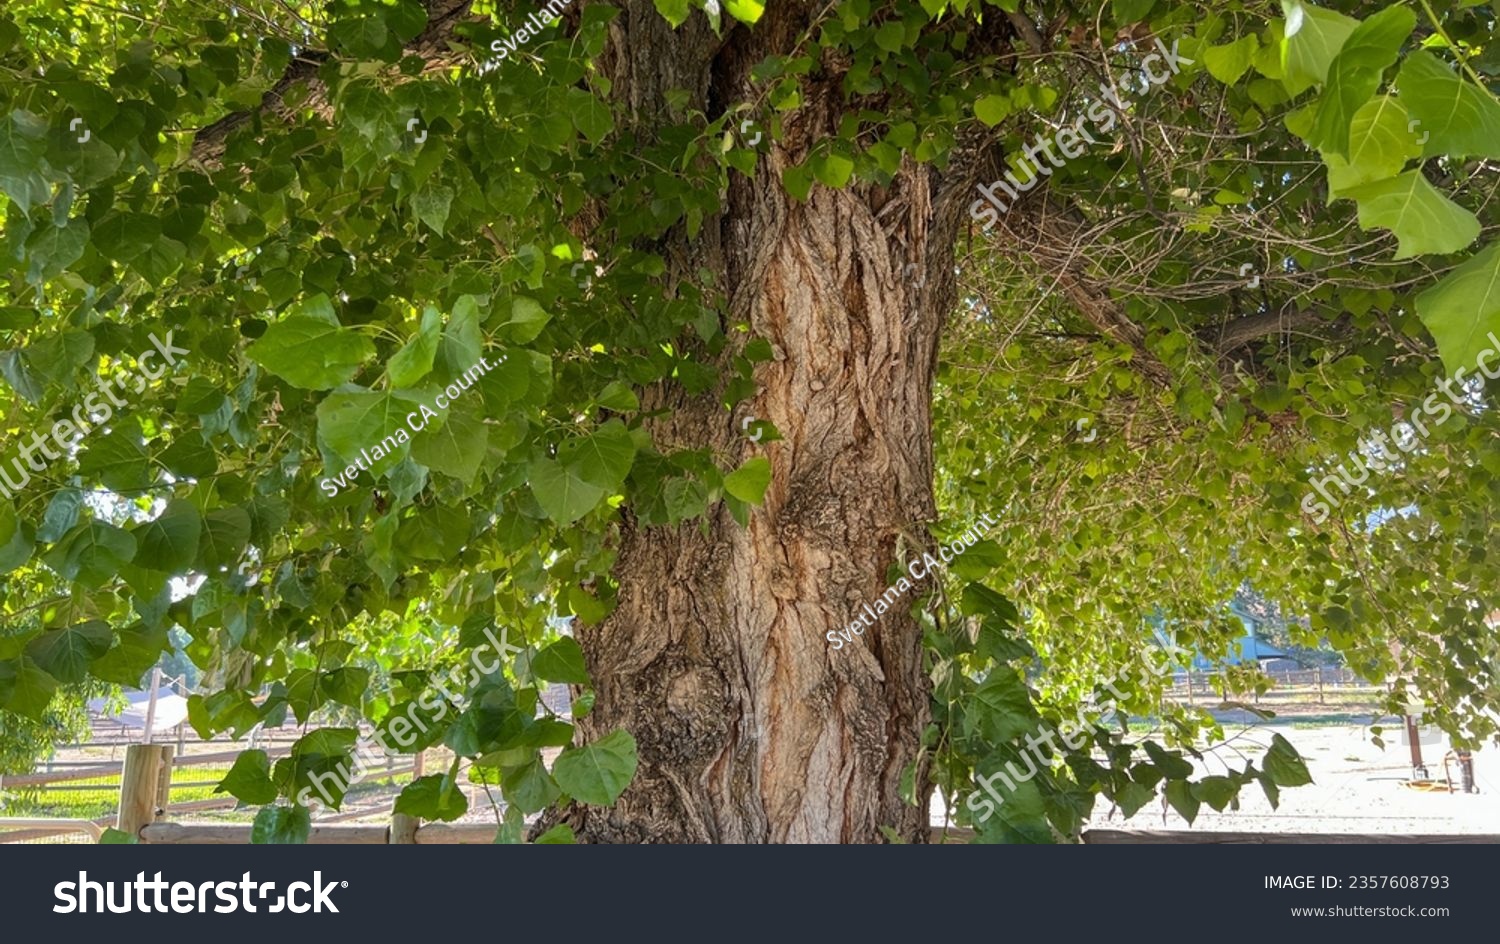 A very old cottonwood (poplar) tree with green leaves and a silvery brown trunk in summer on a sunny day in Tehachapi, California, USA, as a nice organic natural background. #2357608793